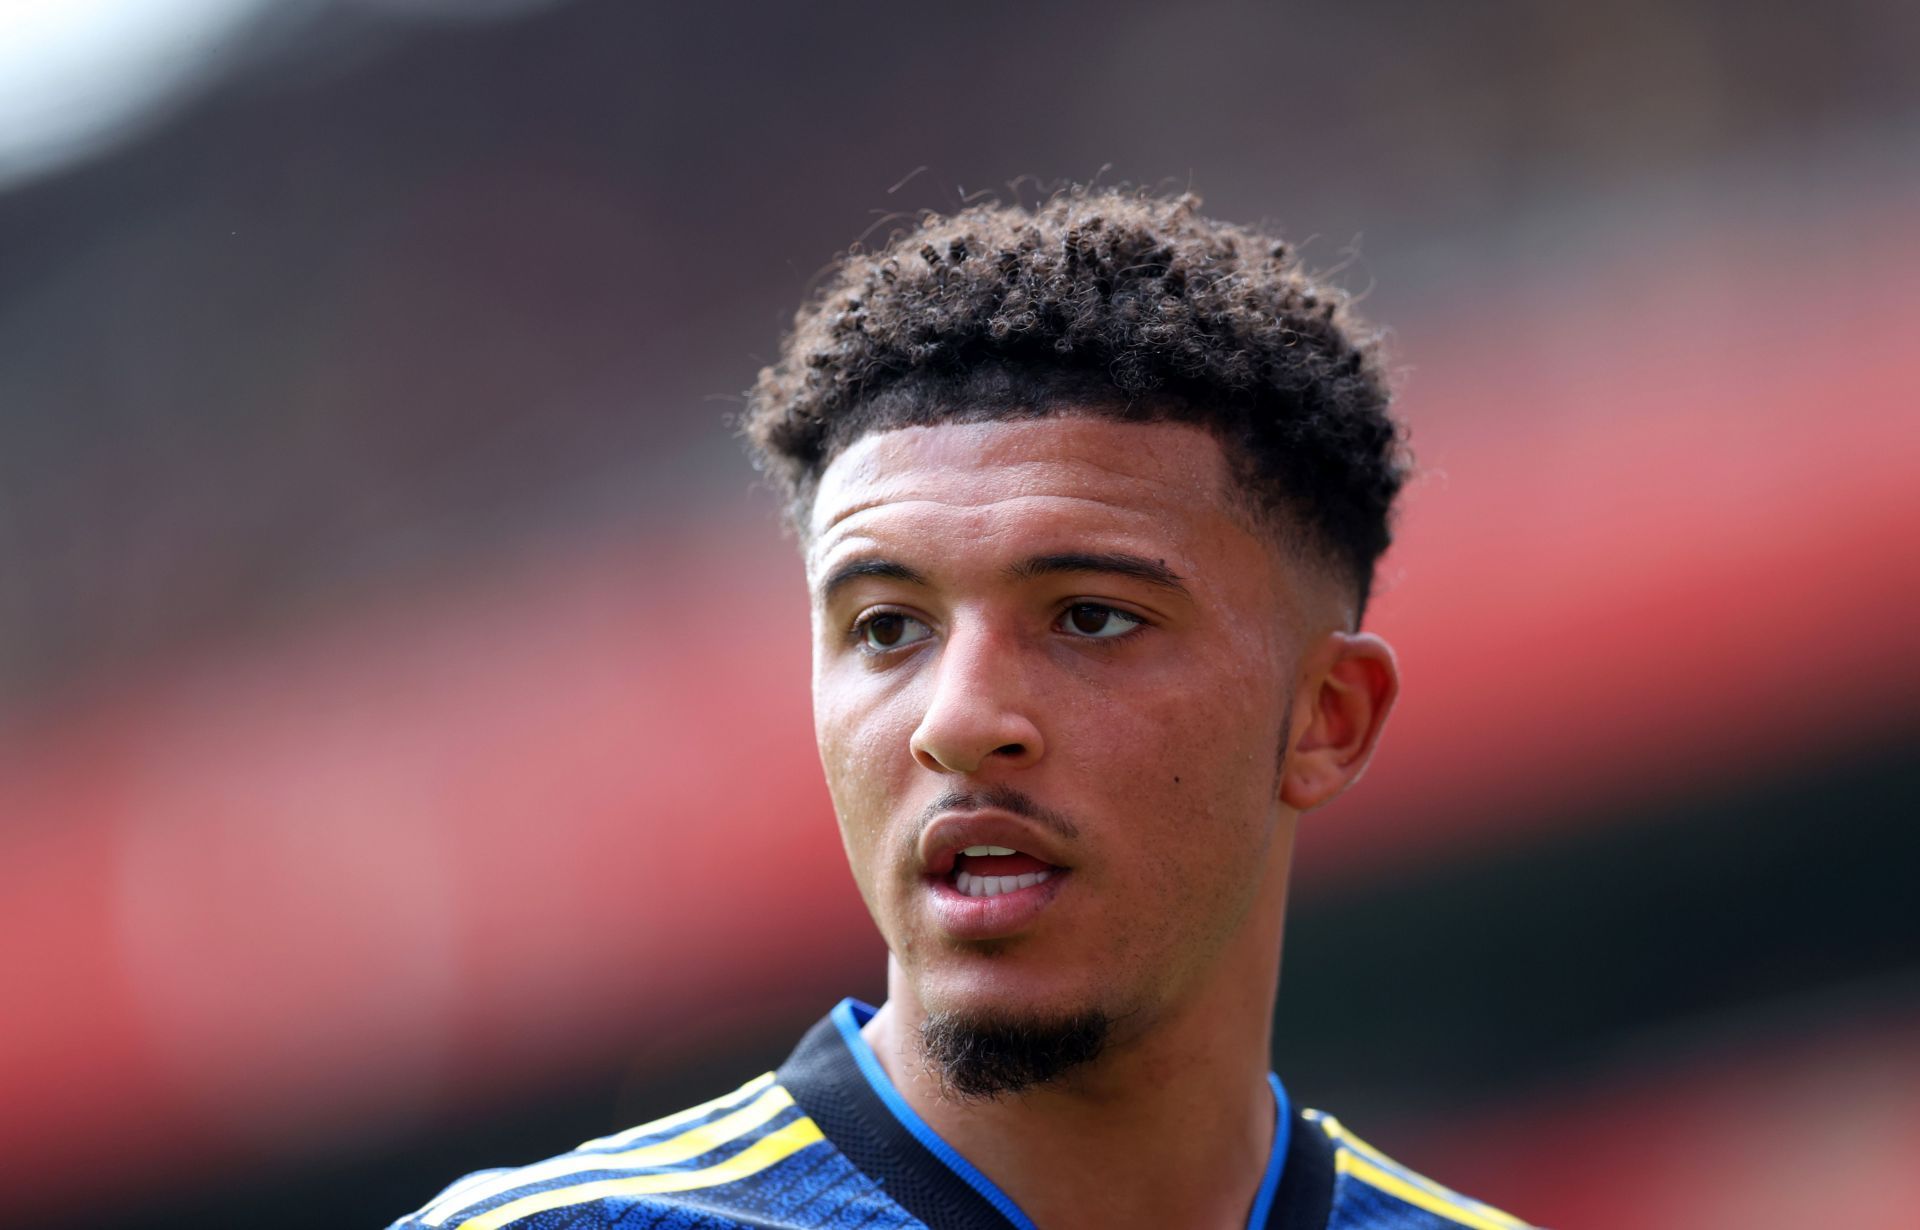 Jadon Sancho has endured a difficult debut season with Manchester United.